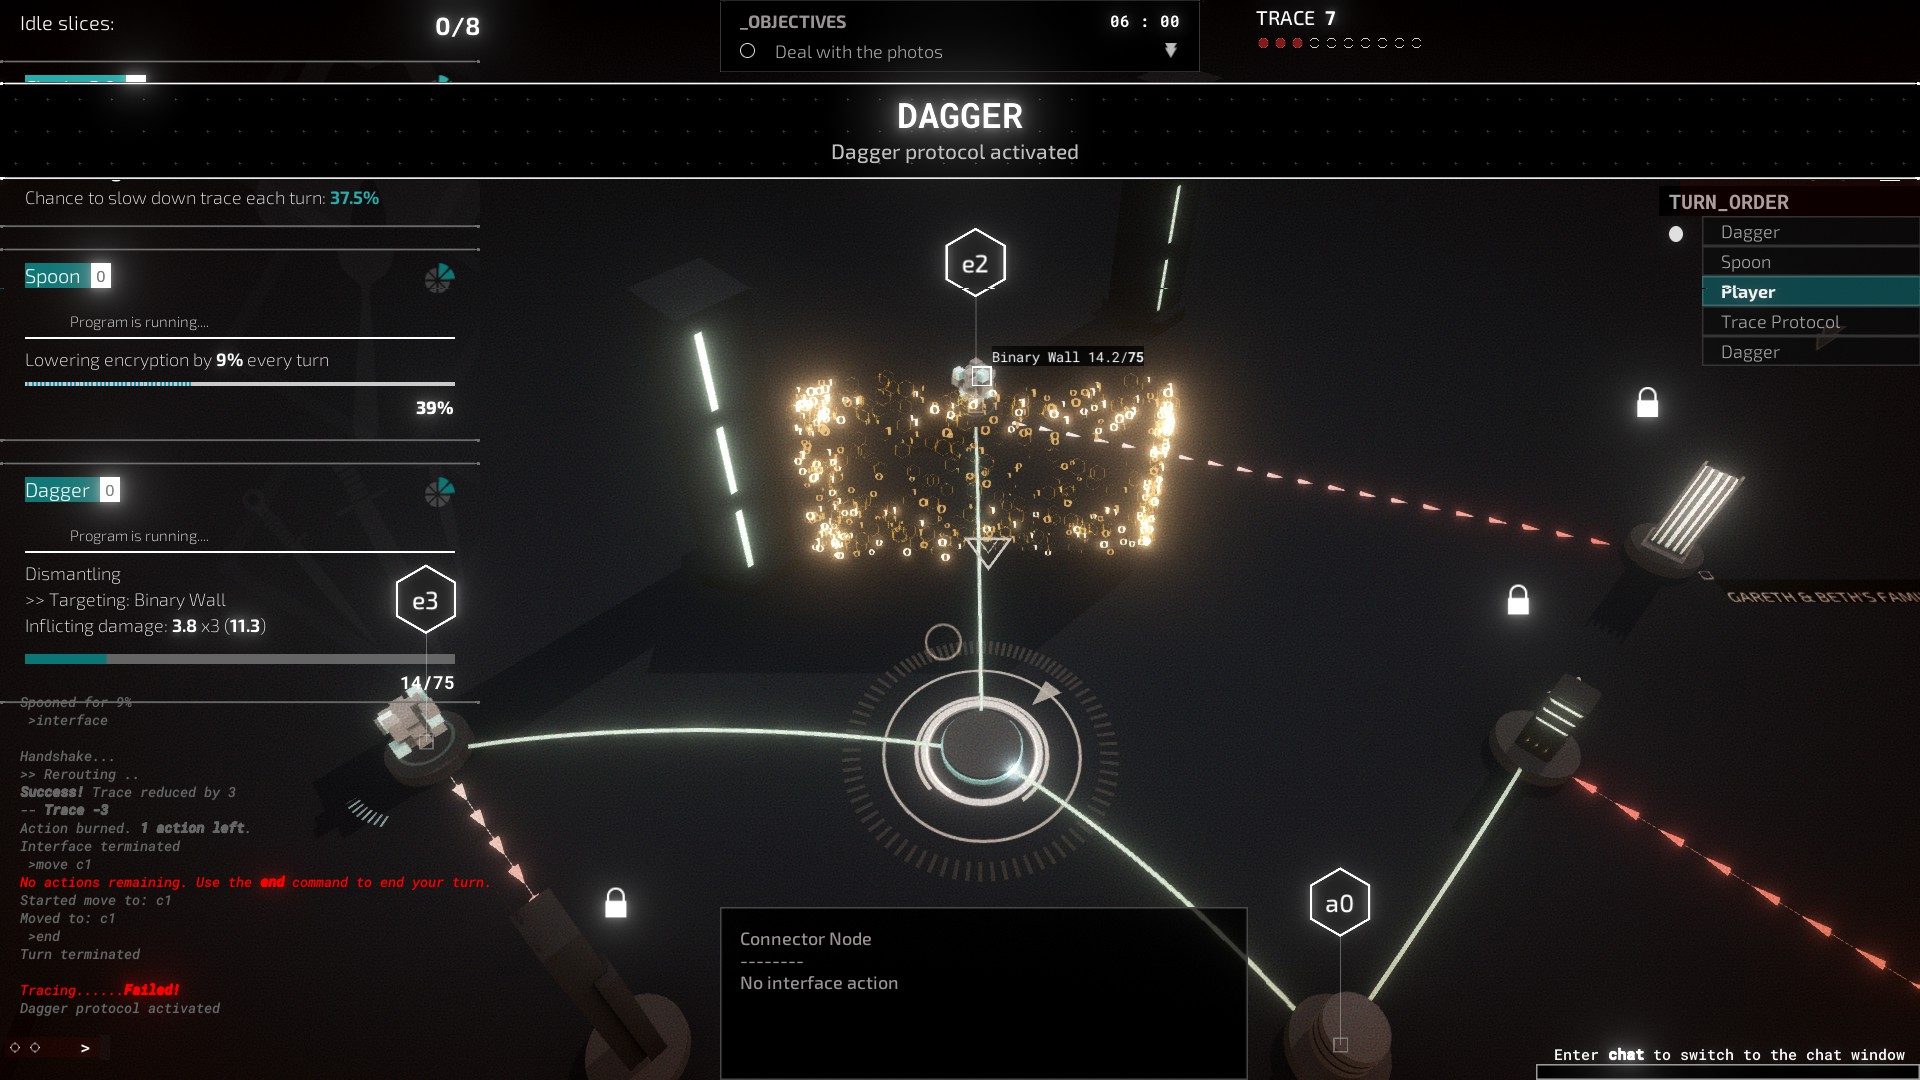 Midnight Protocol game review: Feel like a real hacker